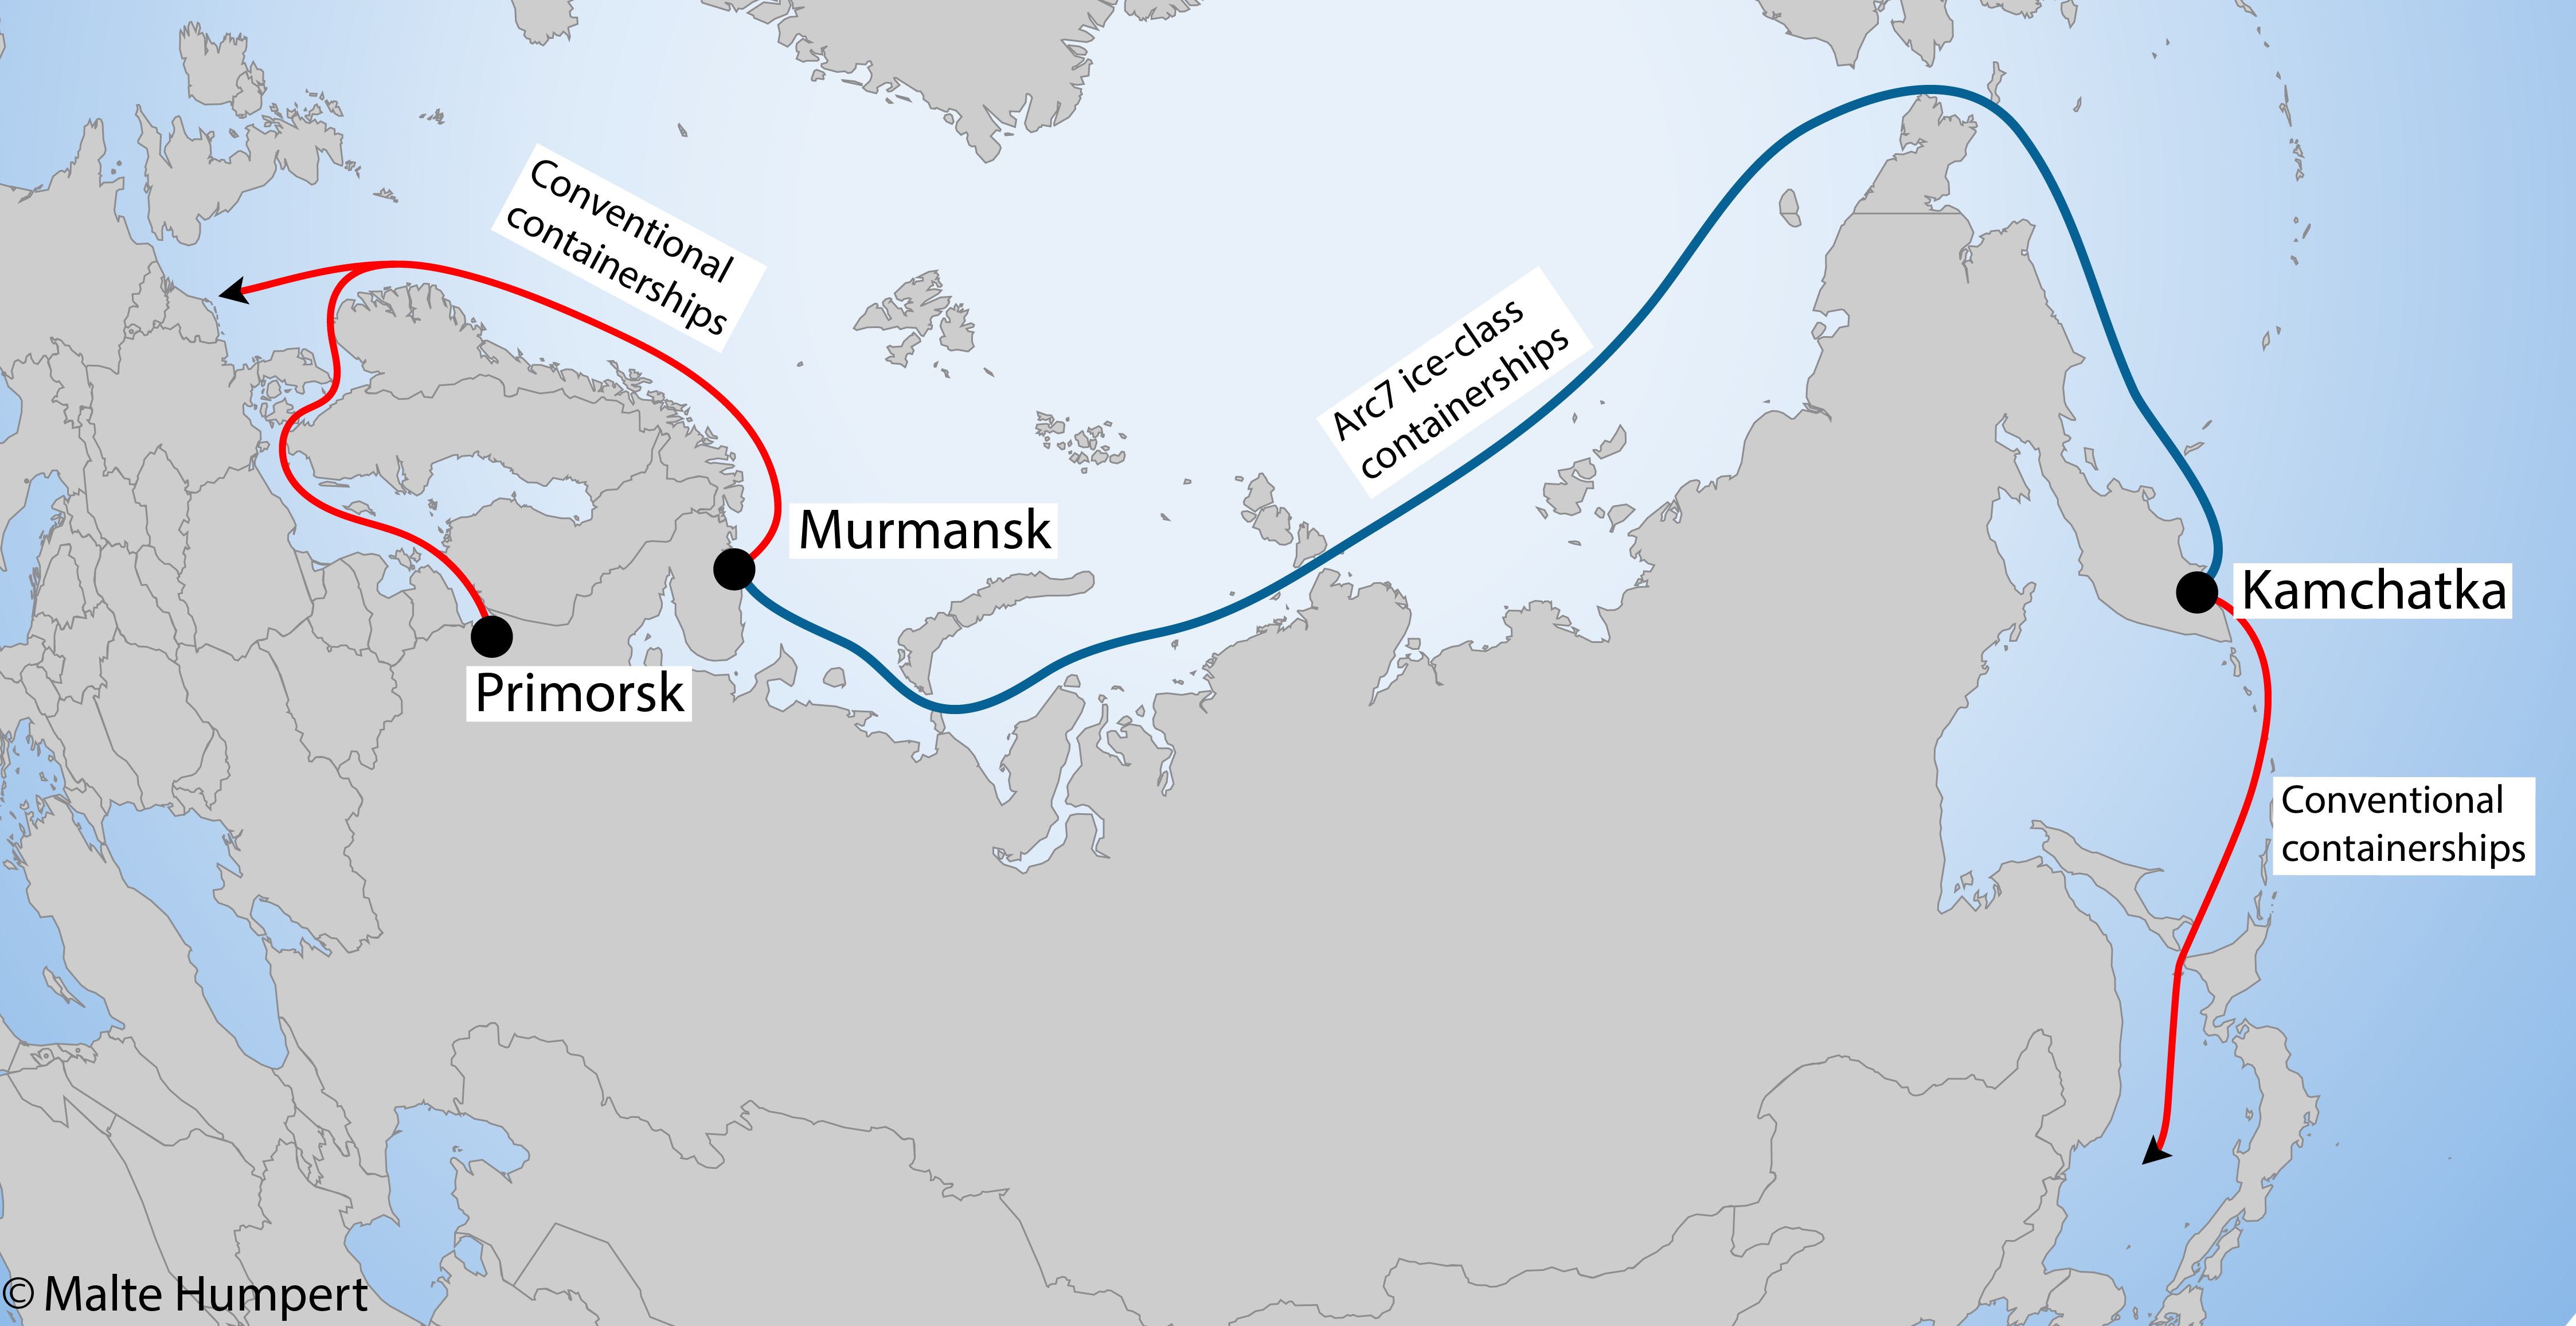 Container Shipping Is Coming to the Arctic along Russia’s Northern Sea